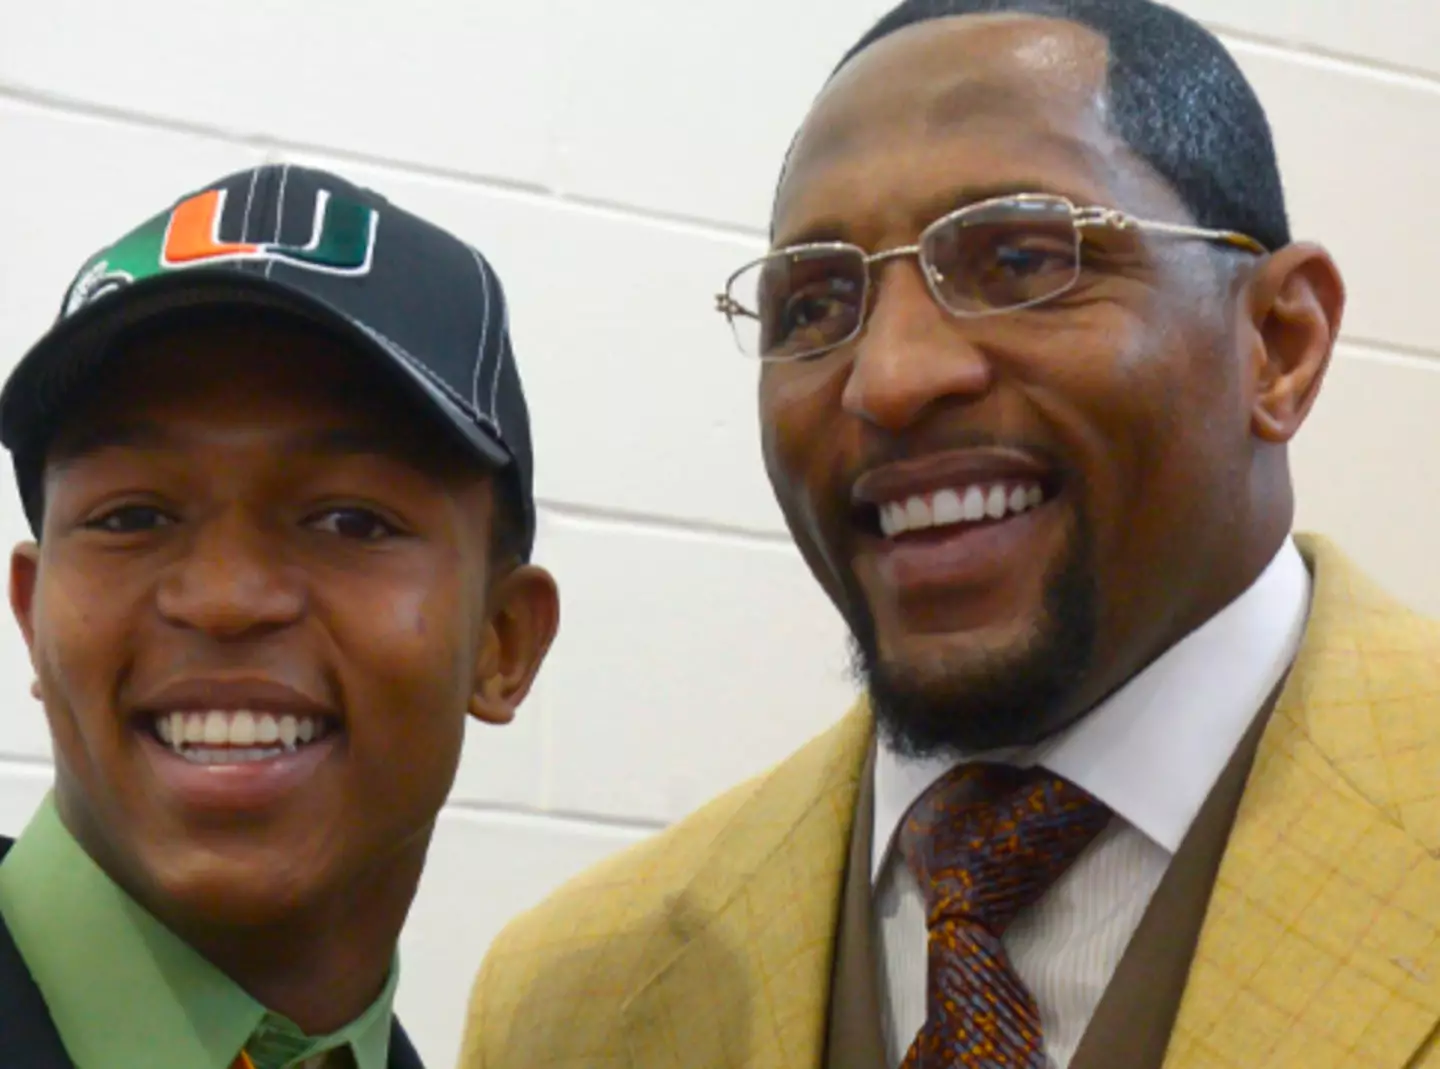 Ray Lewis III followed in his dad's footsteps with football.